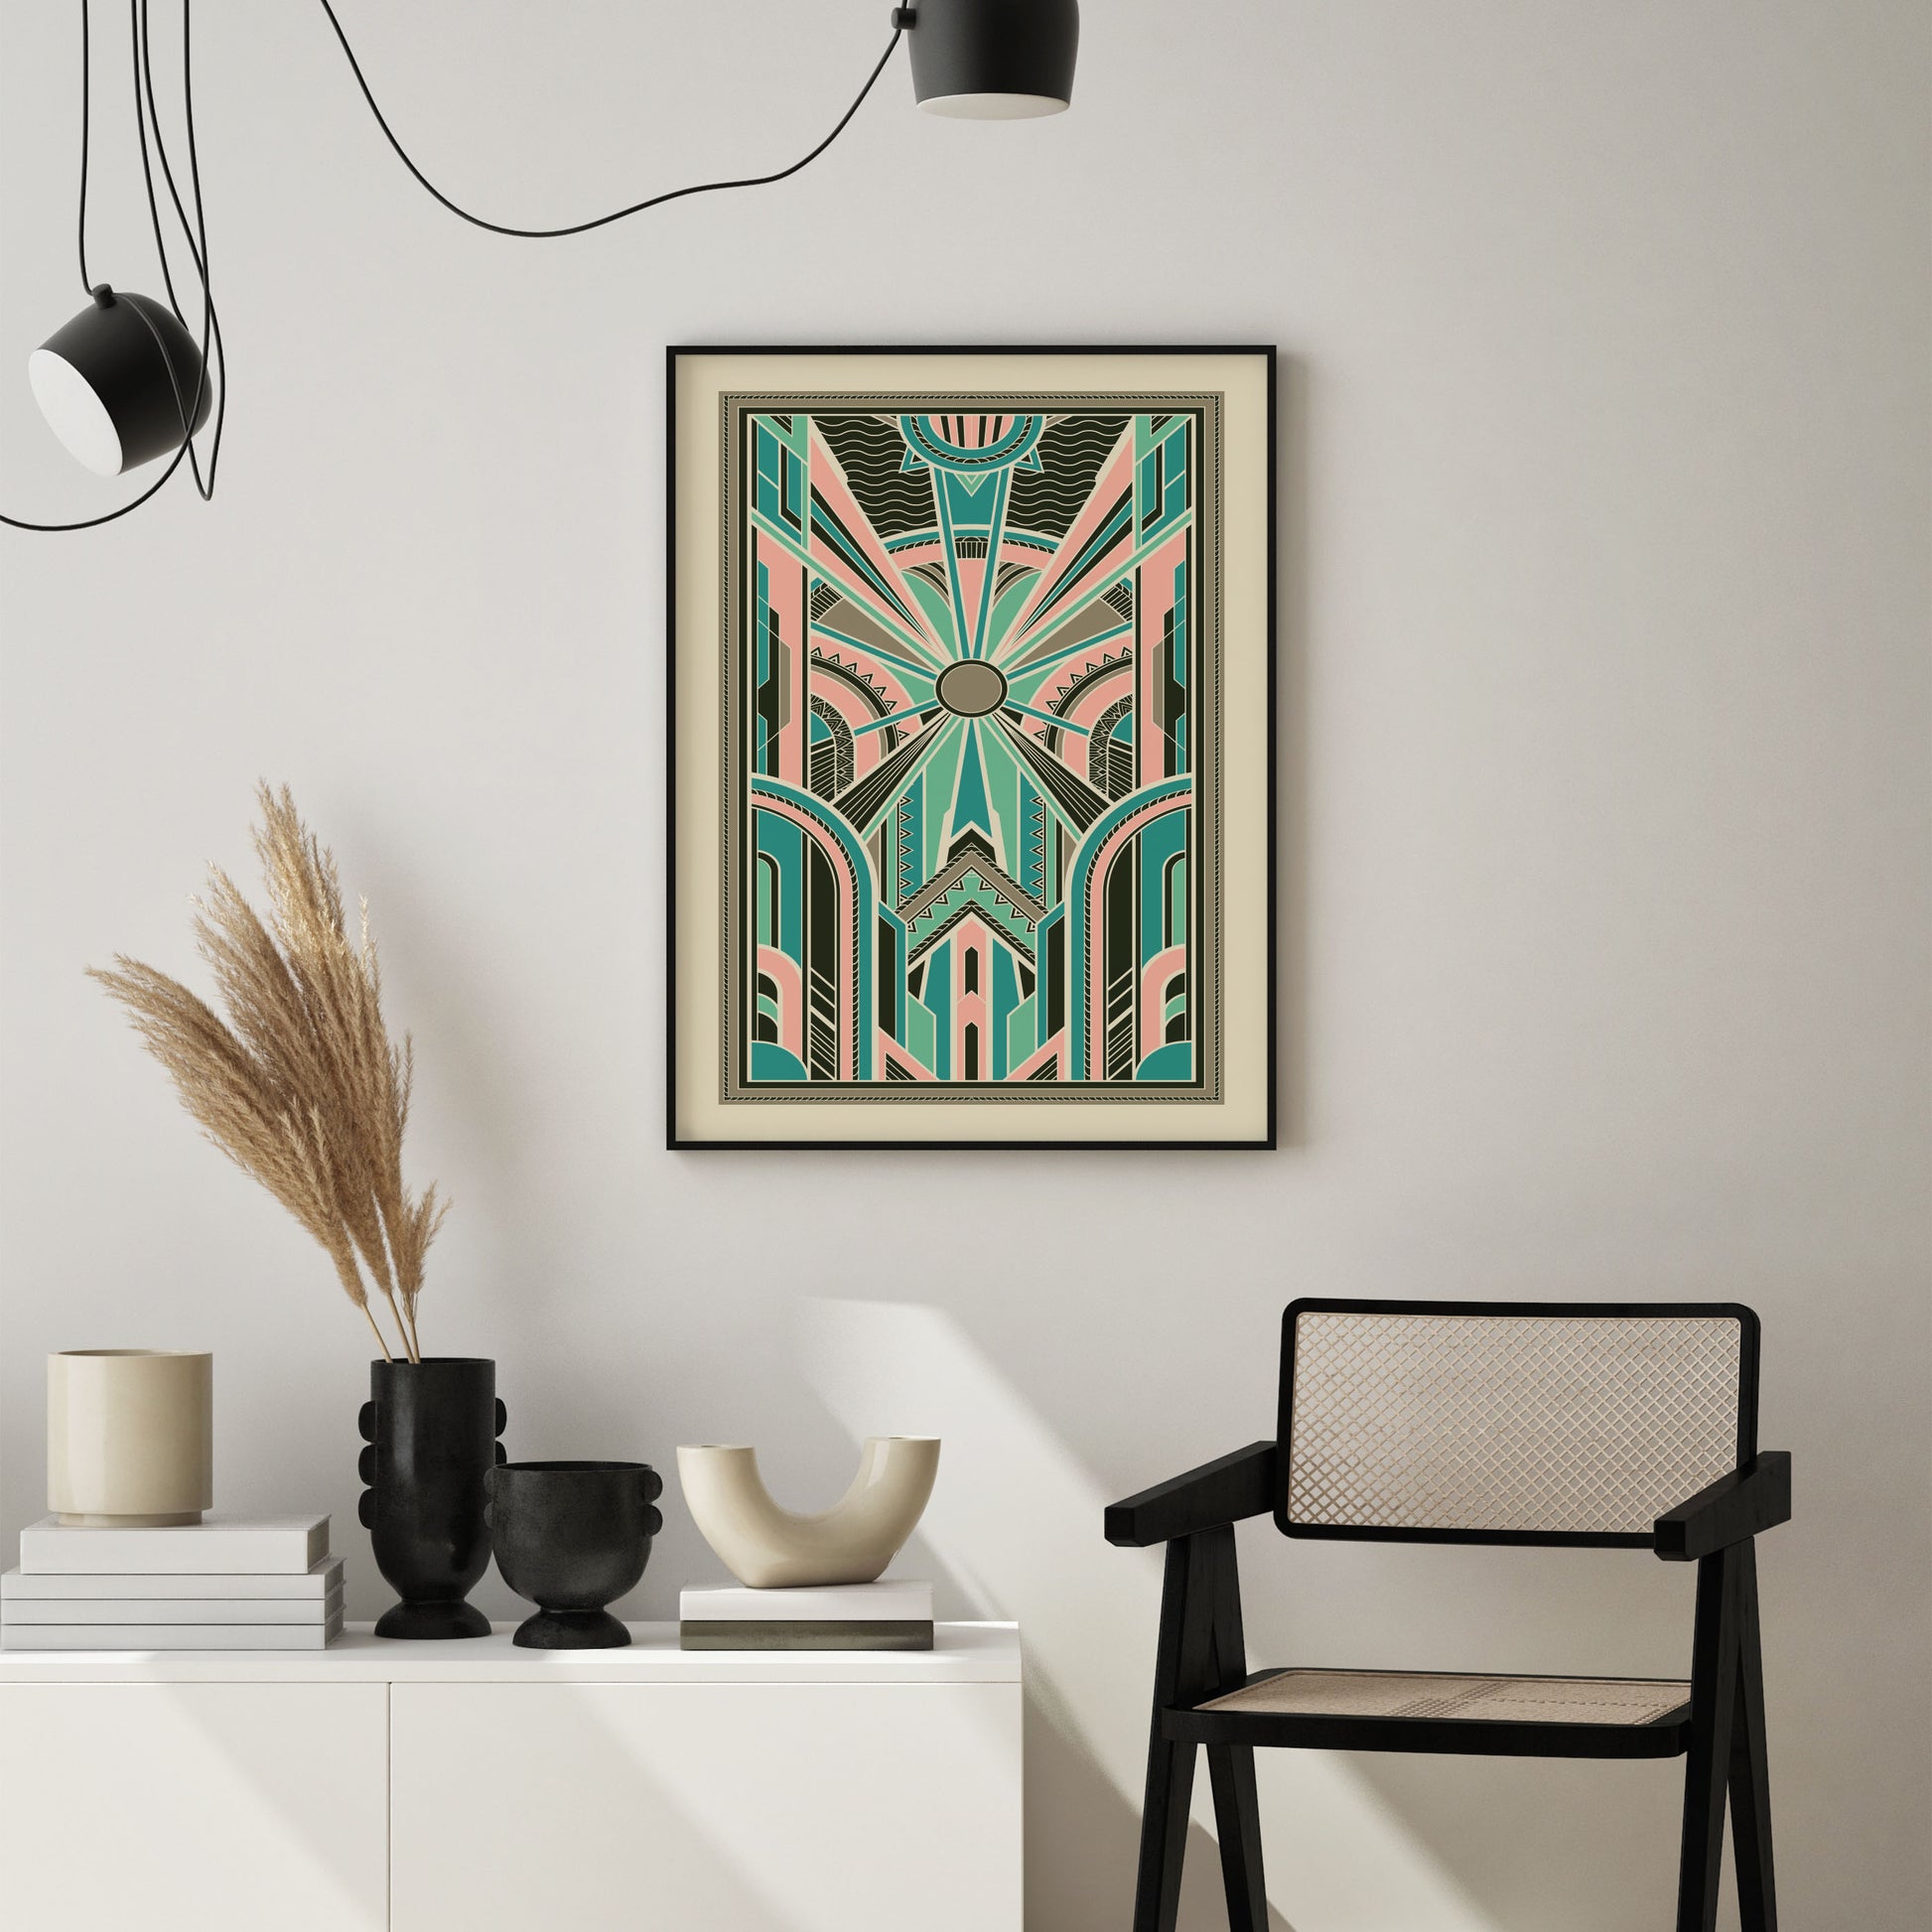 Art deco print with a geometric pattern in pink and teal